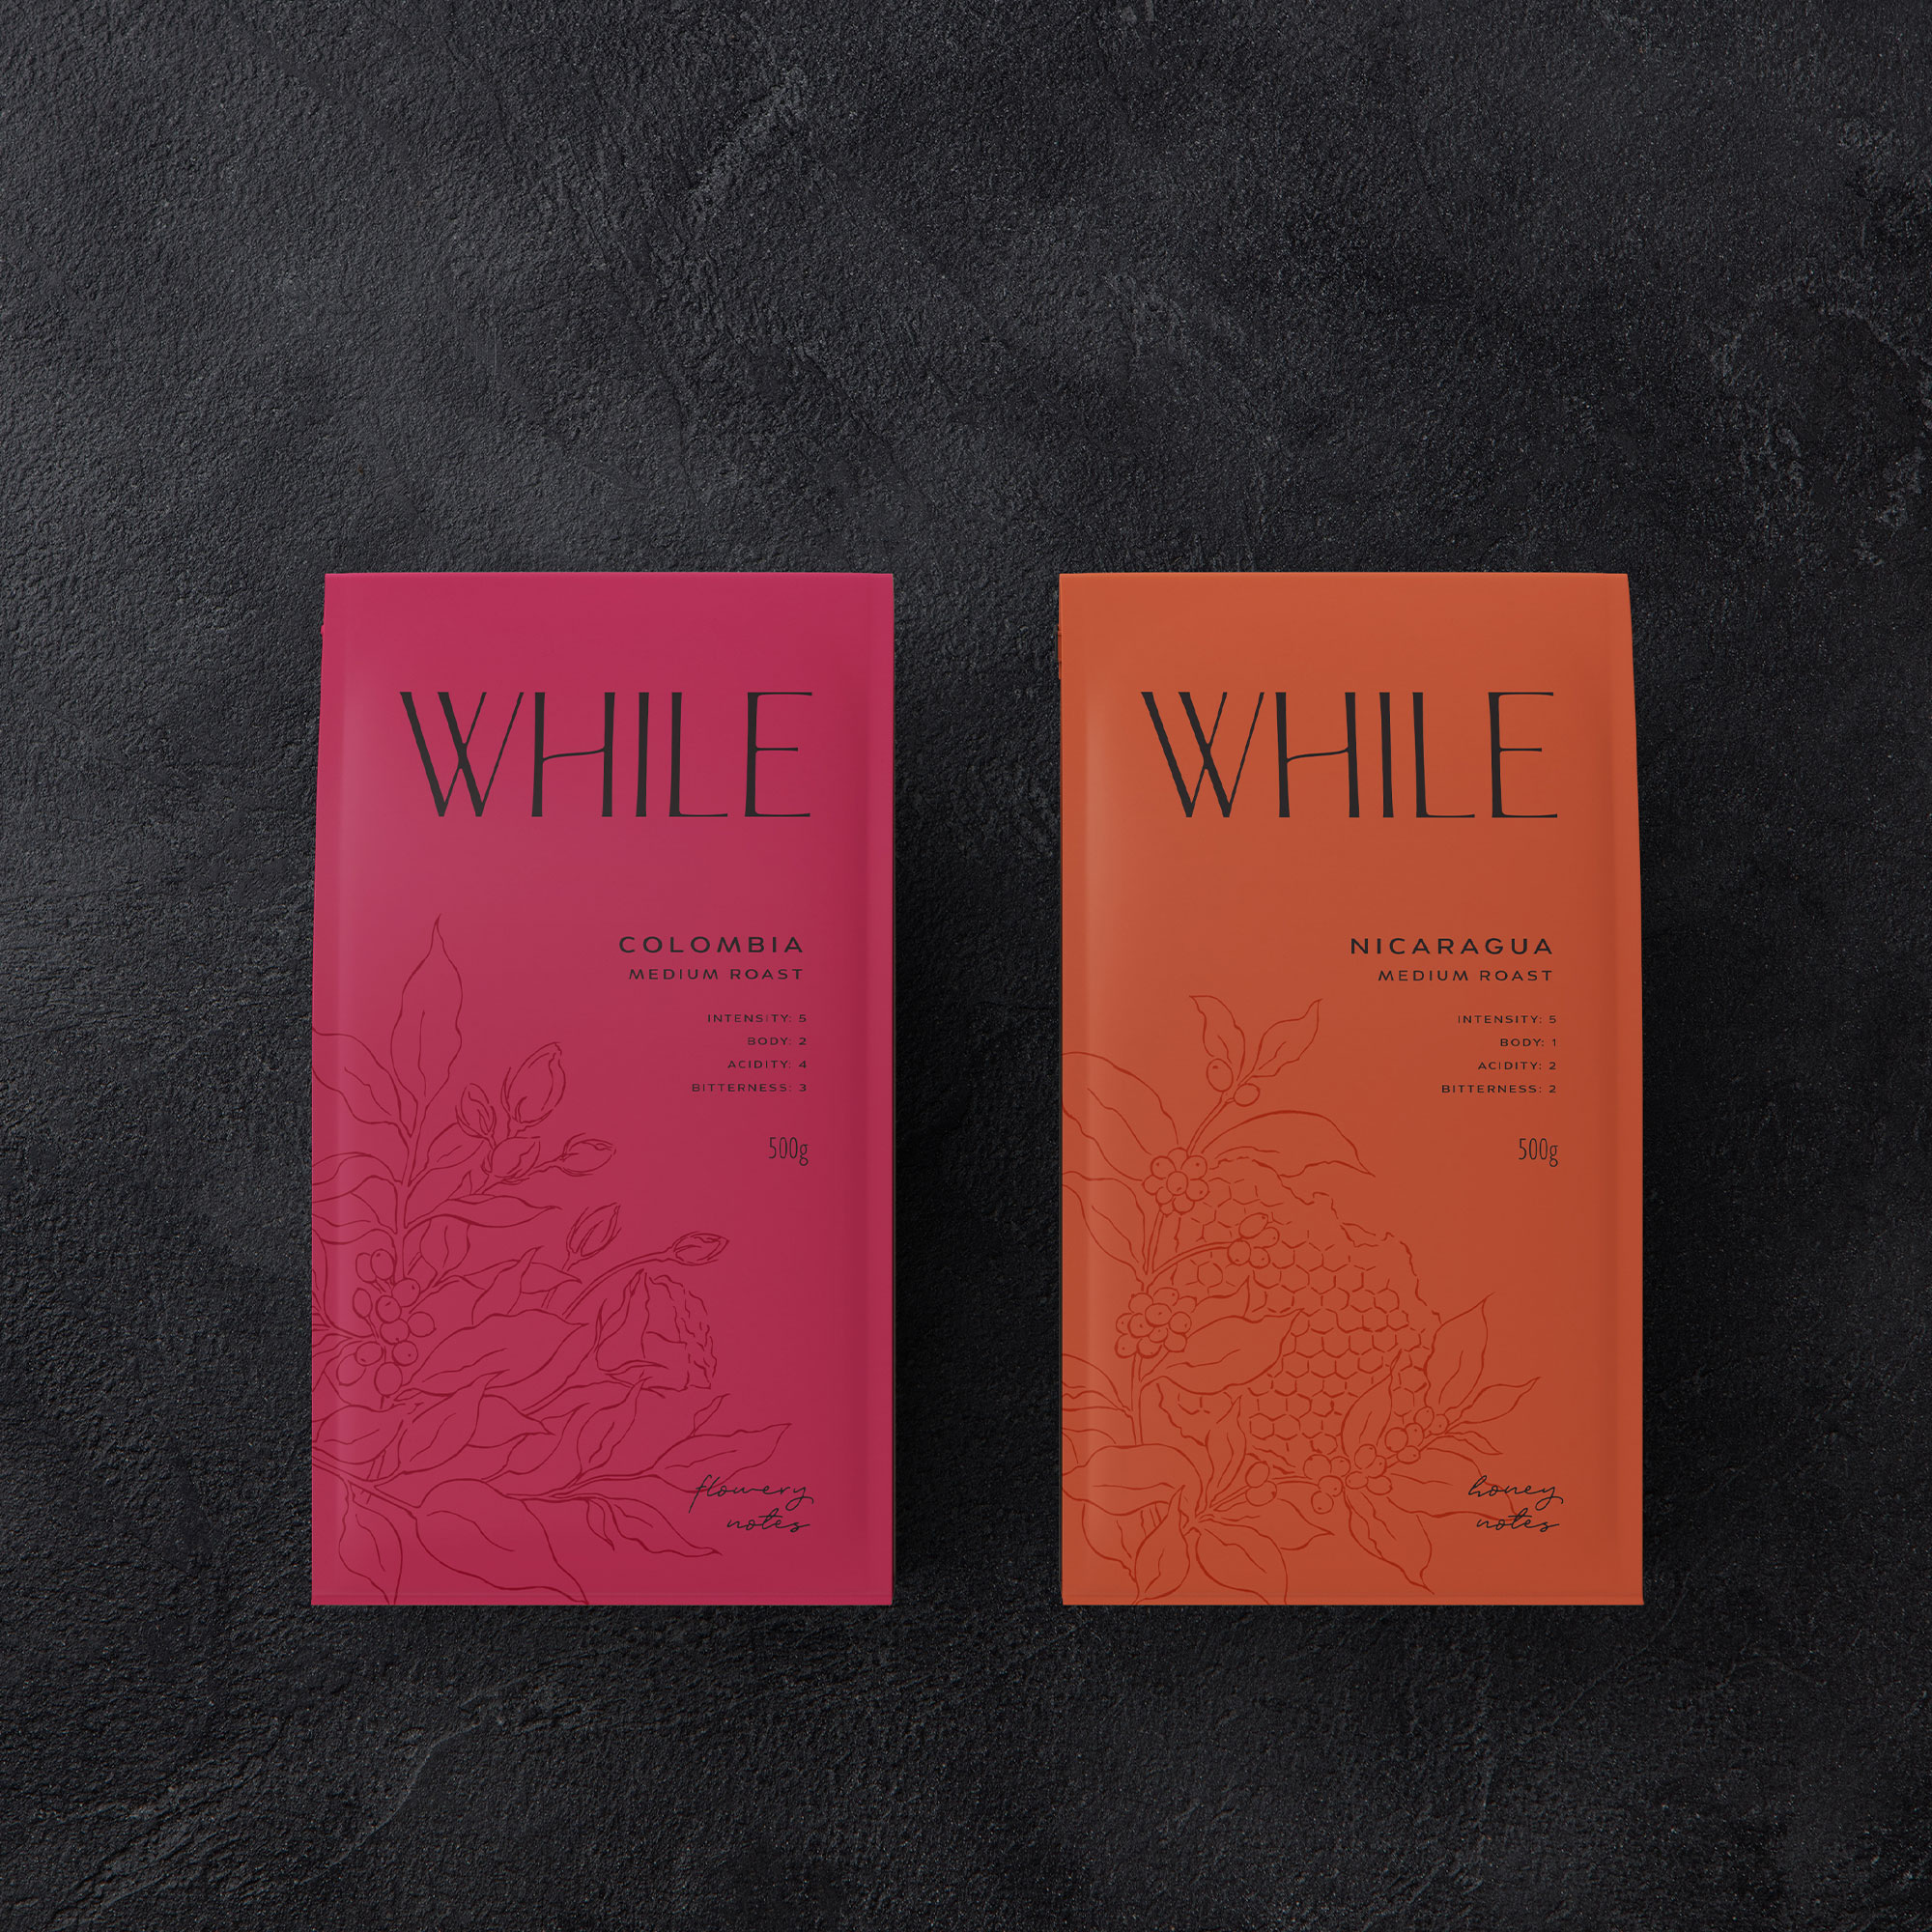 Stylish Brand Identity and Packaging Design for a Sustainable Coffee Brand